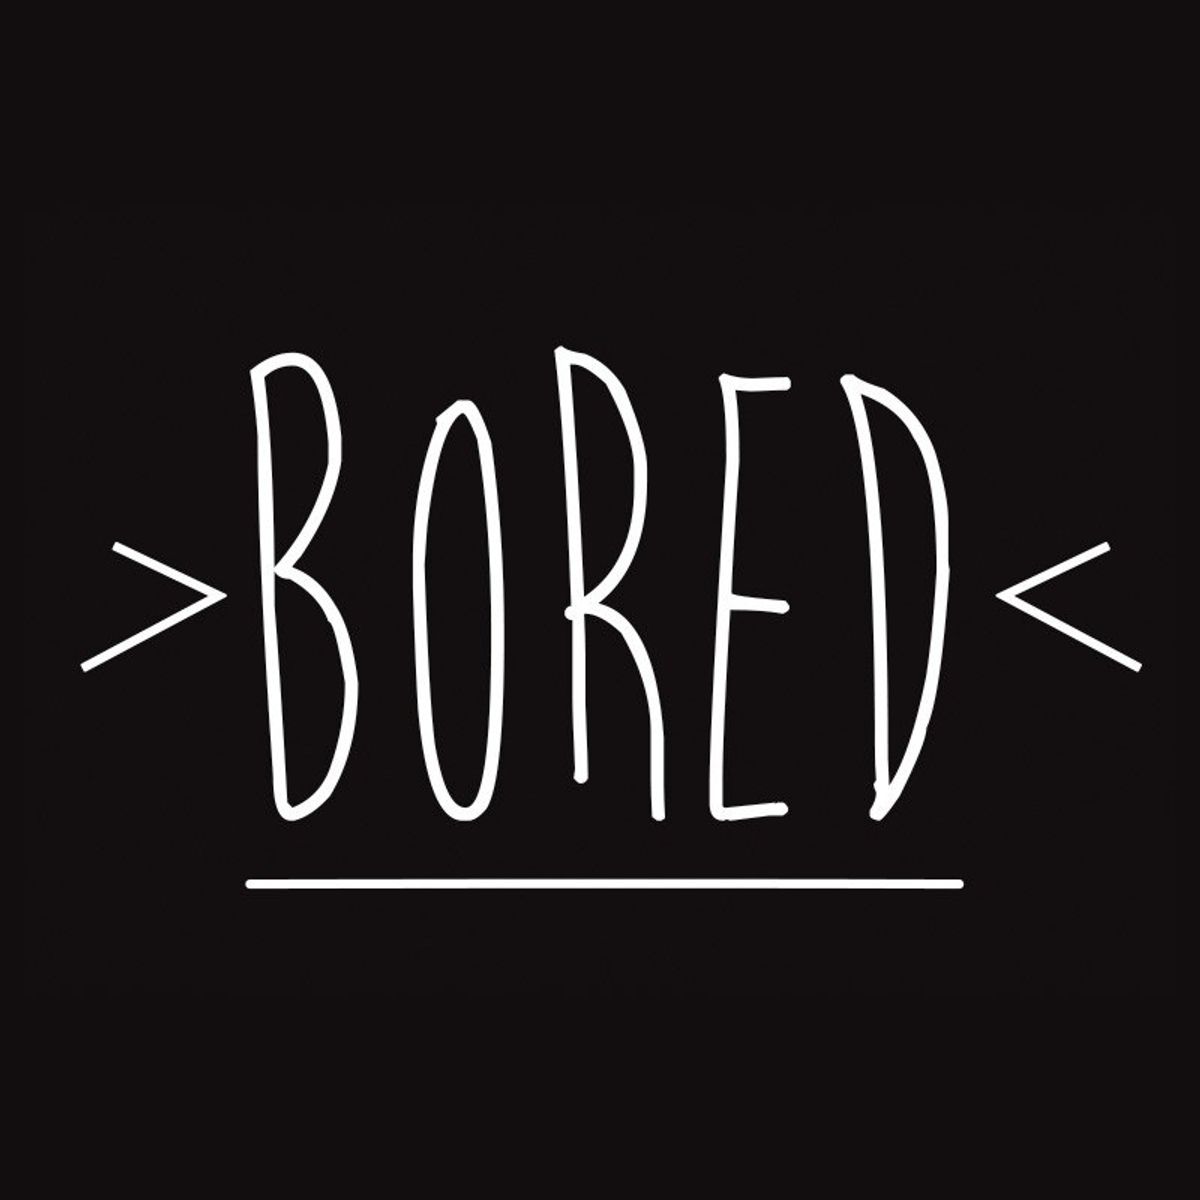 10 Things to Do When You're Bored